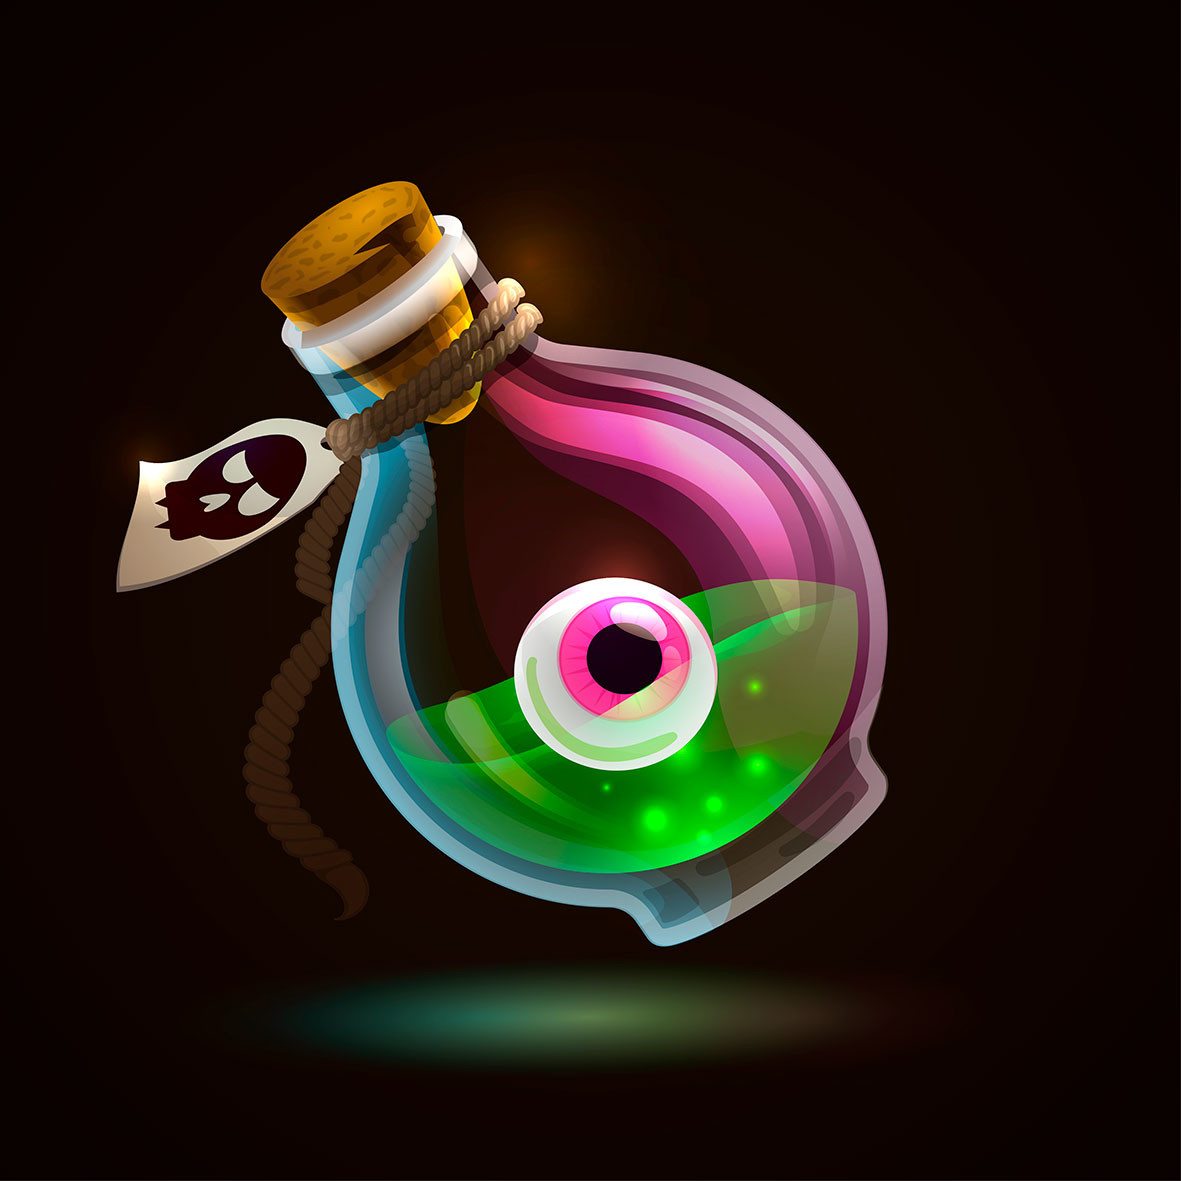 Icons potions. Potion капсулы. Глаза Potion. Potion icon. Potion vector.